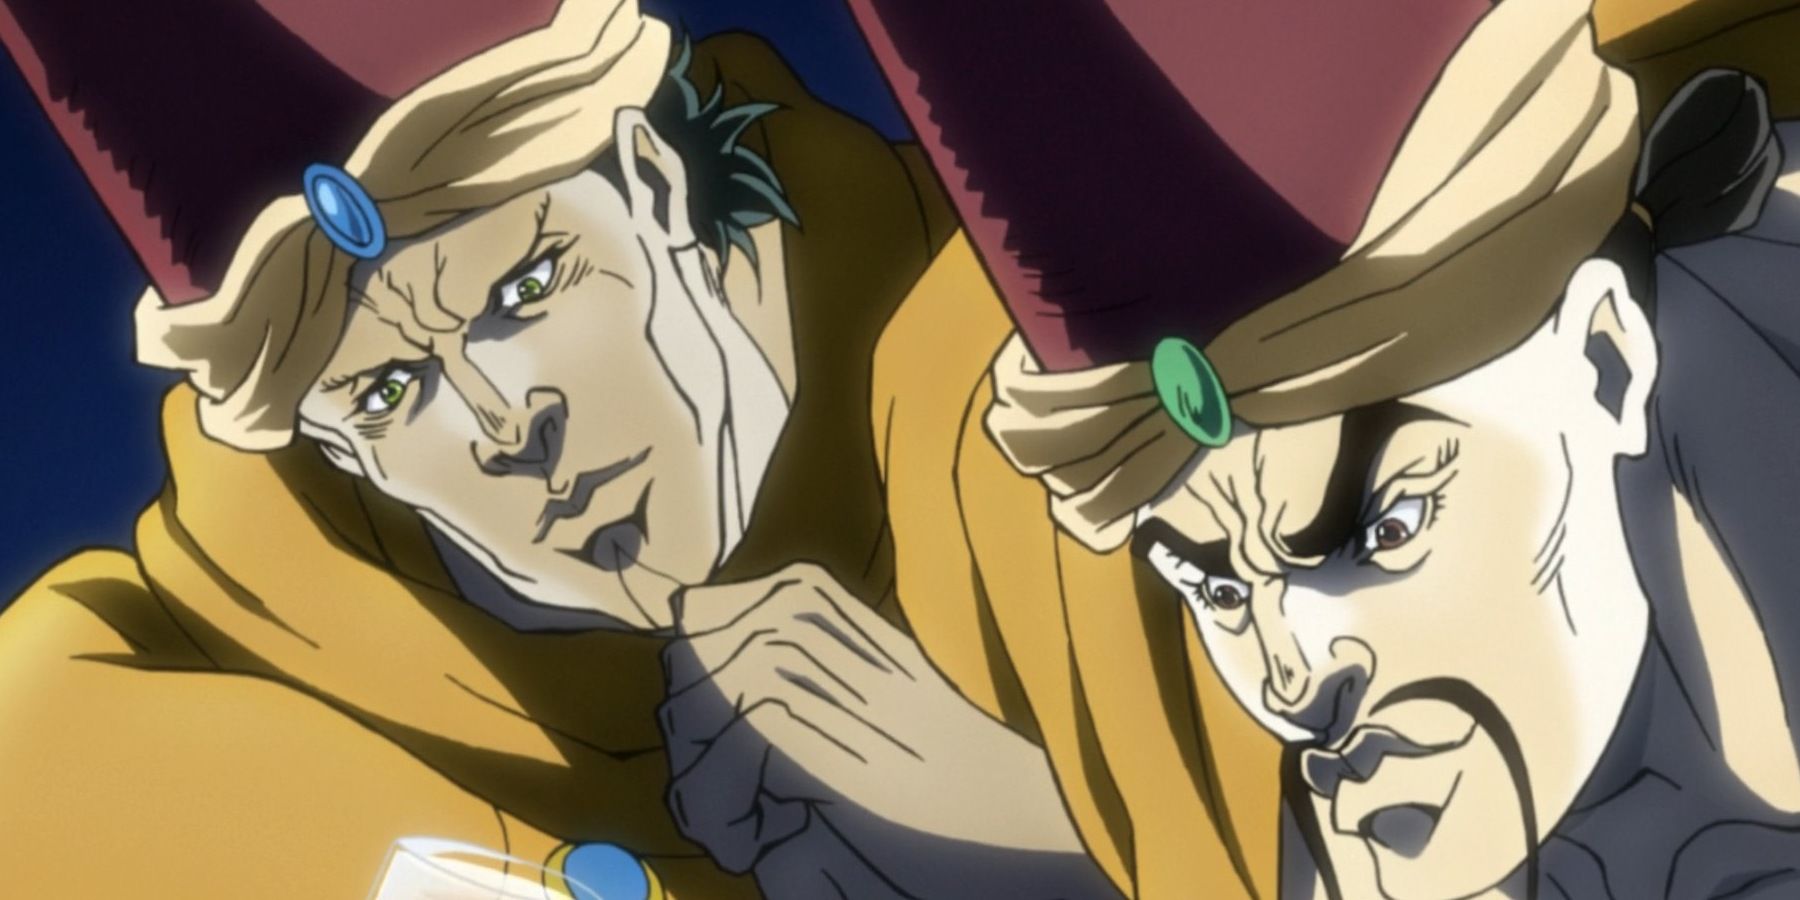 Loggins and Messina from Battle Tendency